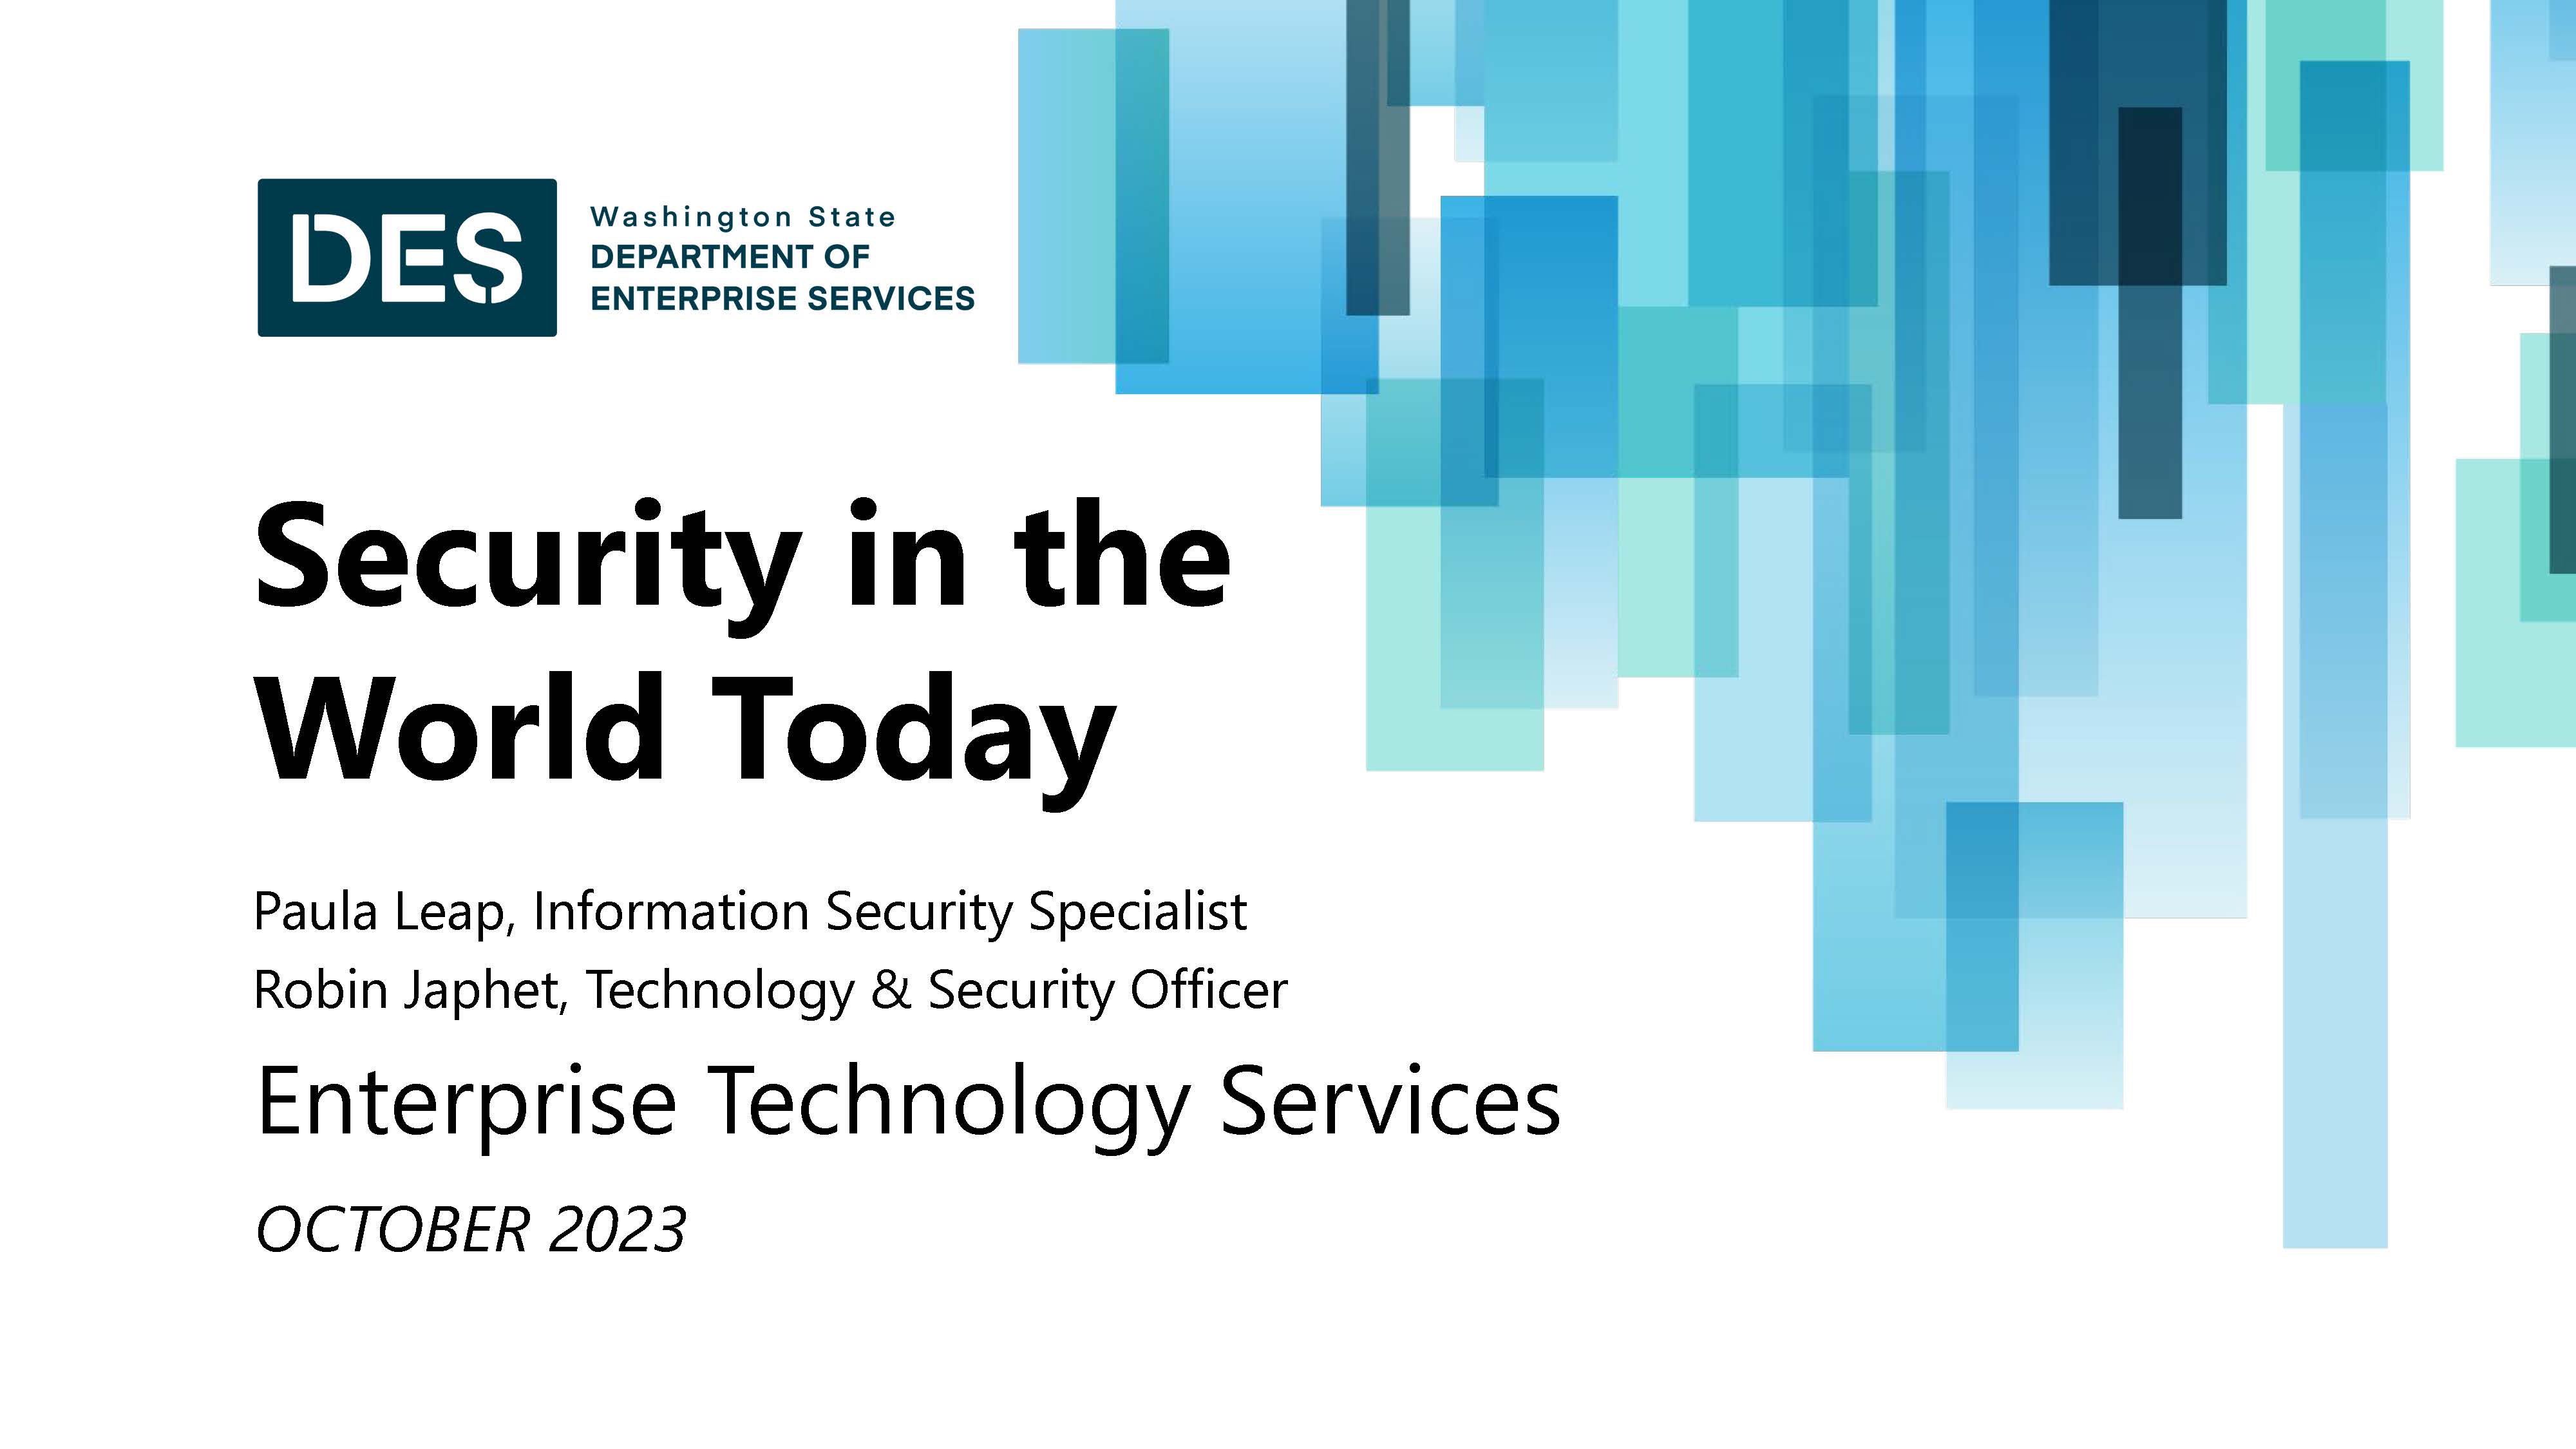 TechTalk_Security in the World today (002)_Page_01.jpg